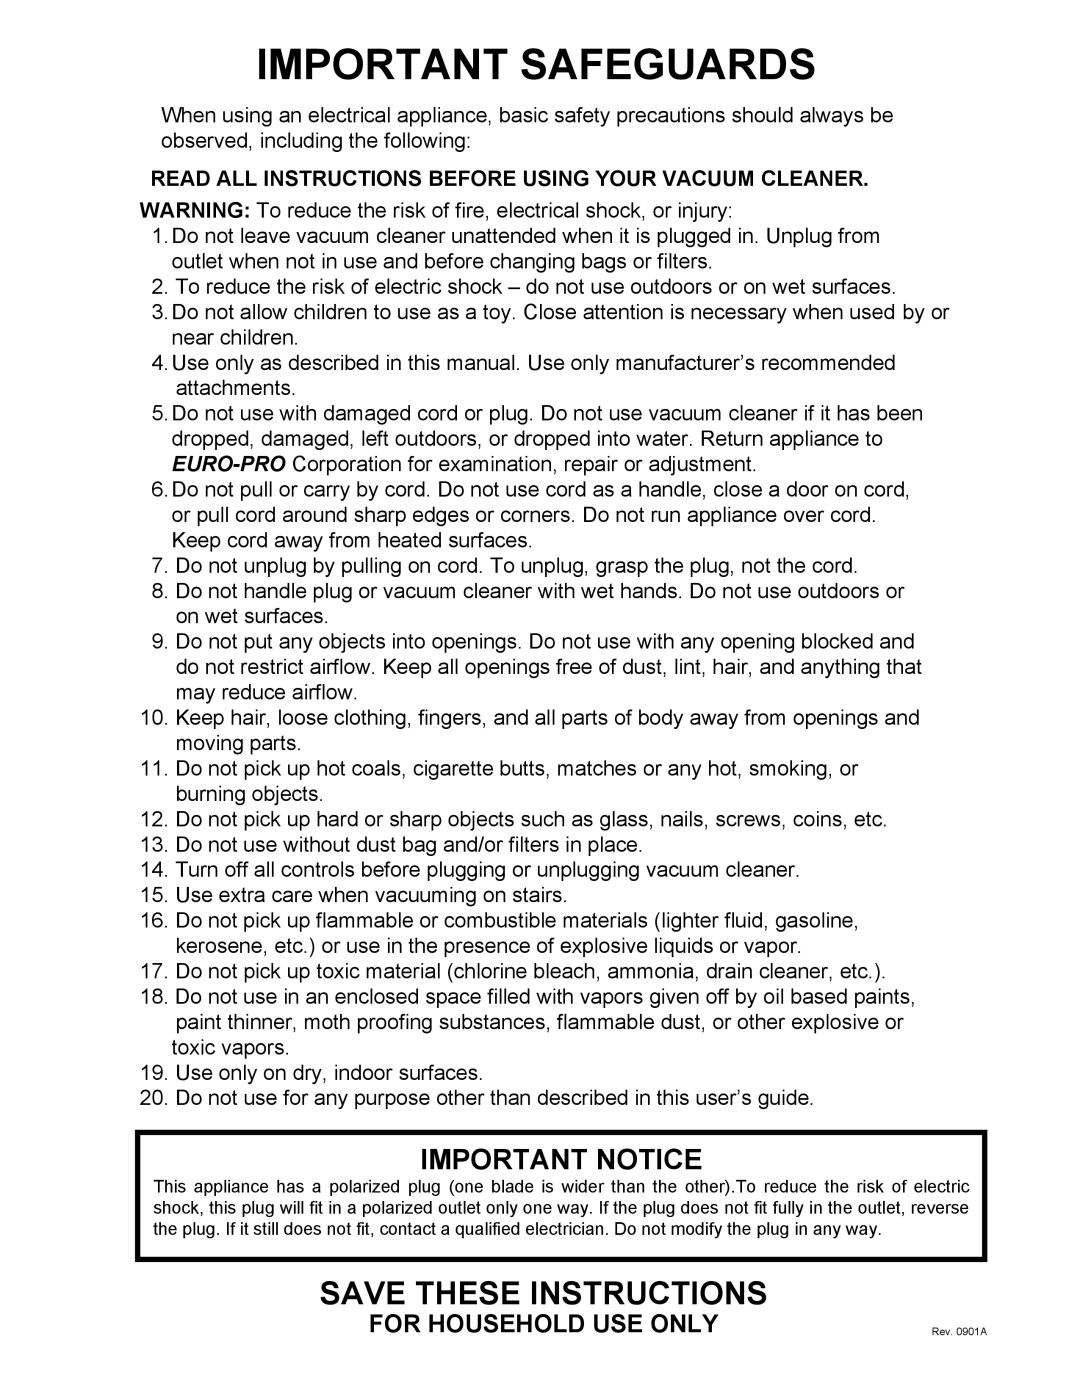 Euro-Pro EP700 manual Important Safeguards, Save These Instructions, Important Notice, For Household Use Only 